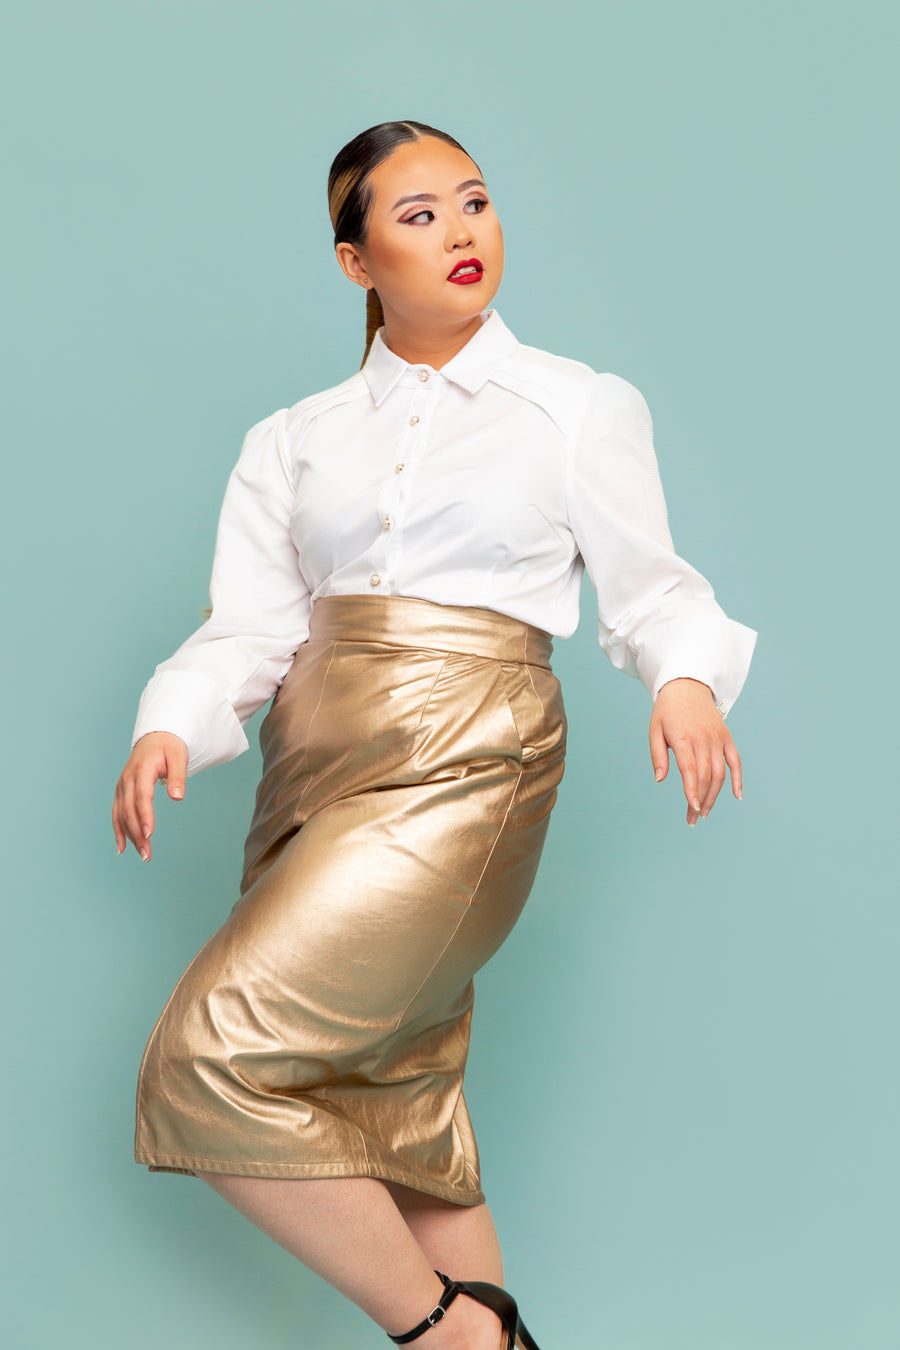 Gold Faux Leather Skirt